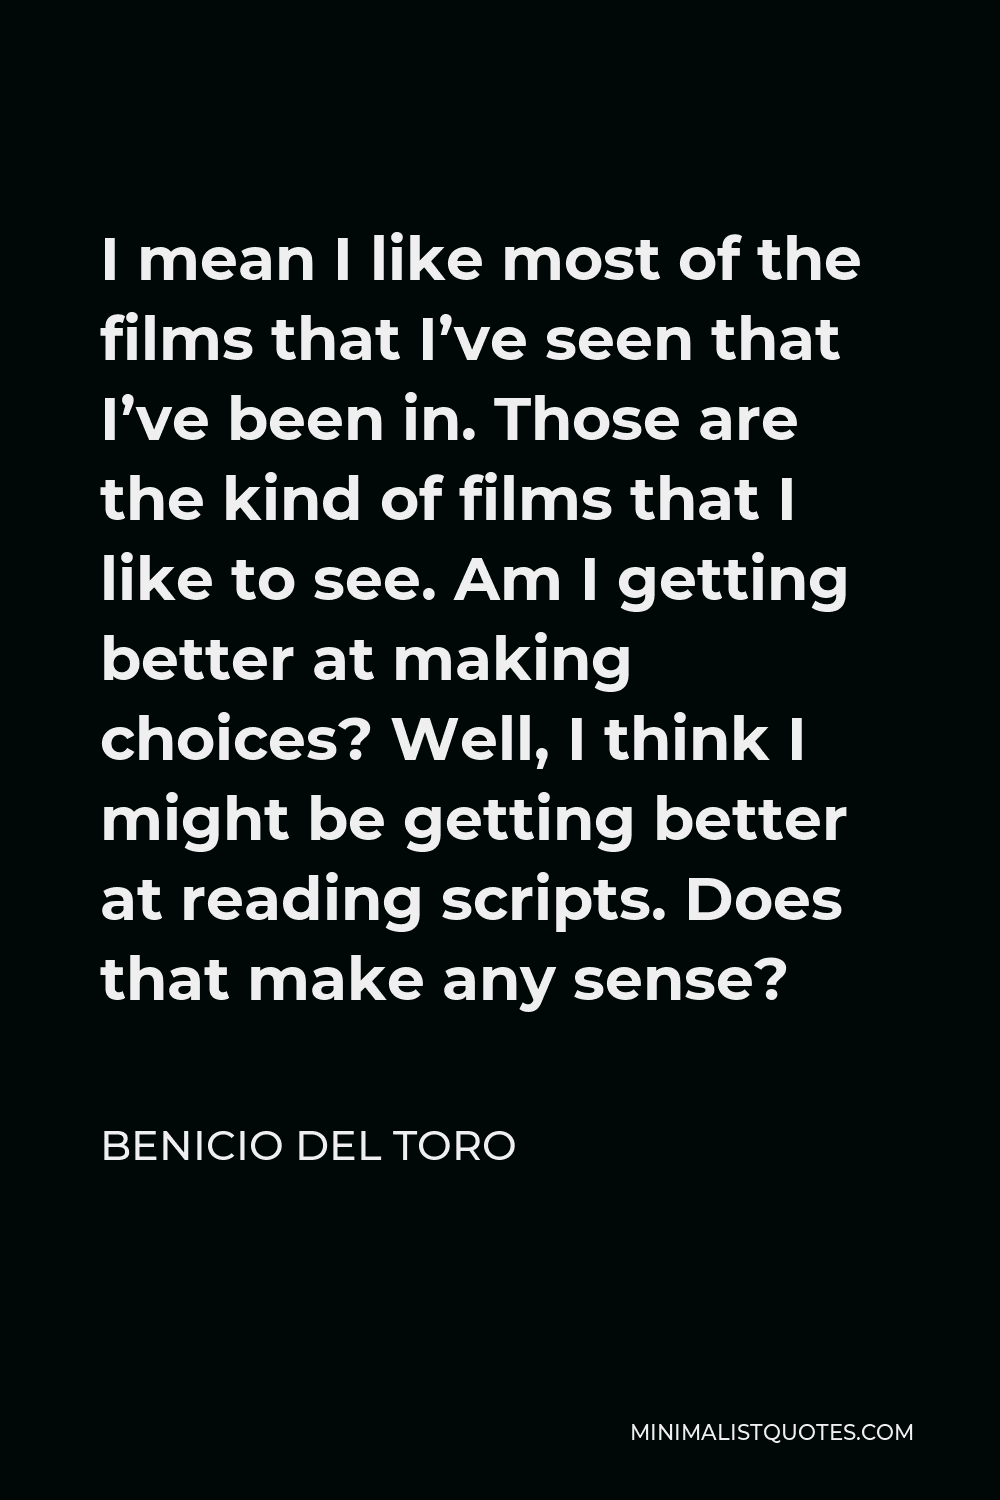 Benicio Del Toro Quote - I mean I like most of the films that I’ve seen that I’ve been in. Those are the kind of films that I like to see. Am I getting better at making choices? Well, I think I might be getting better at reading scripts. Does that make any sense?